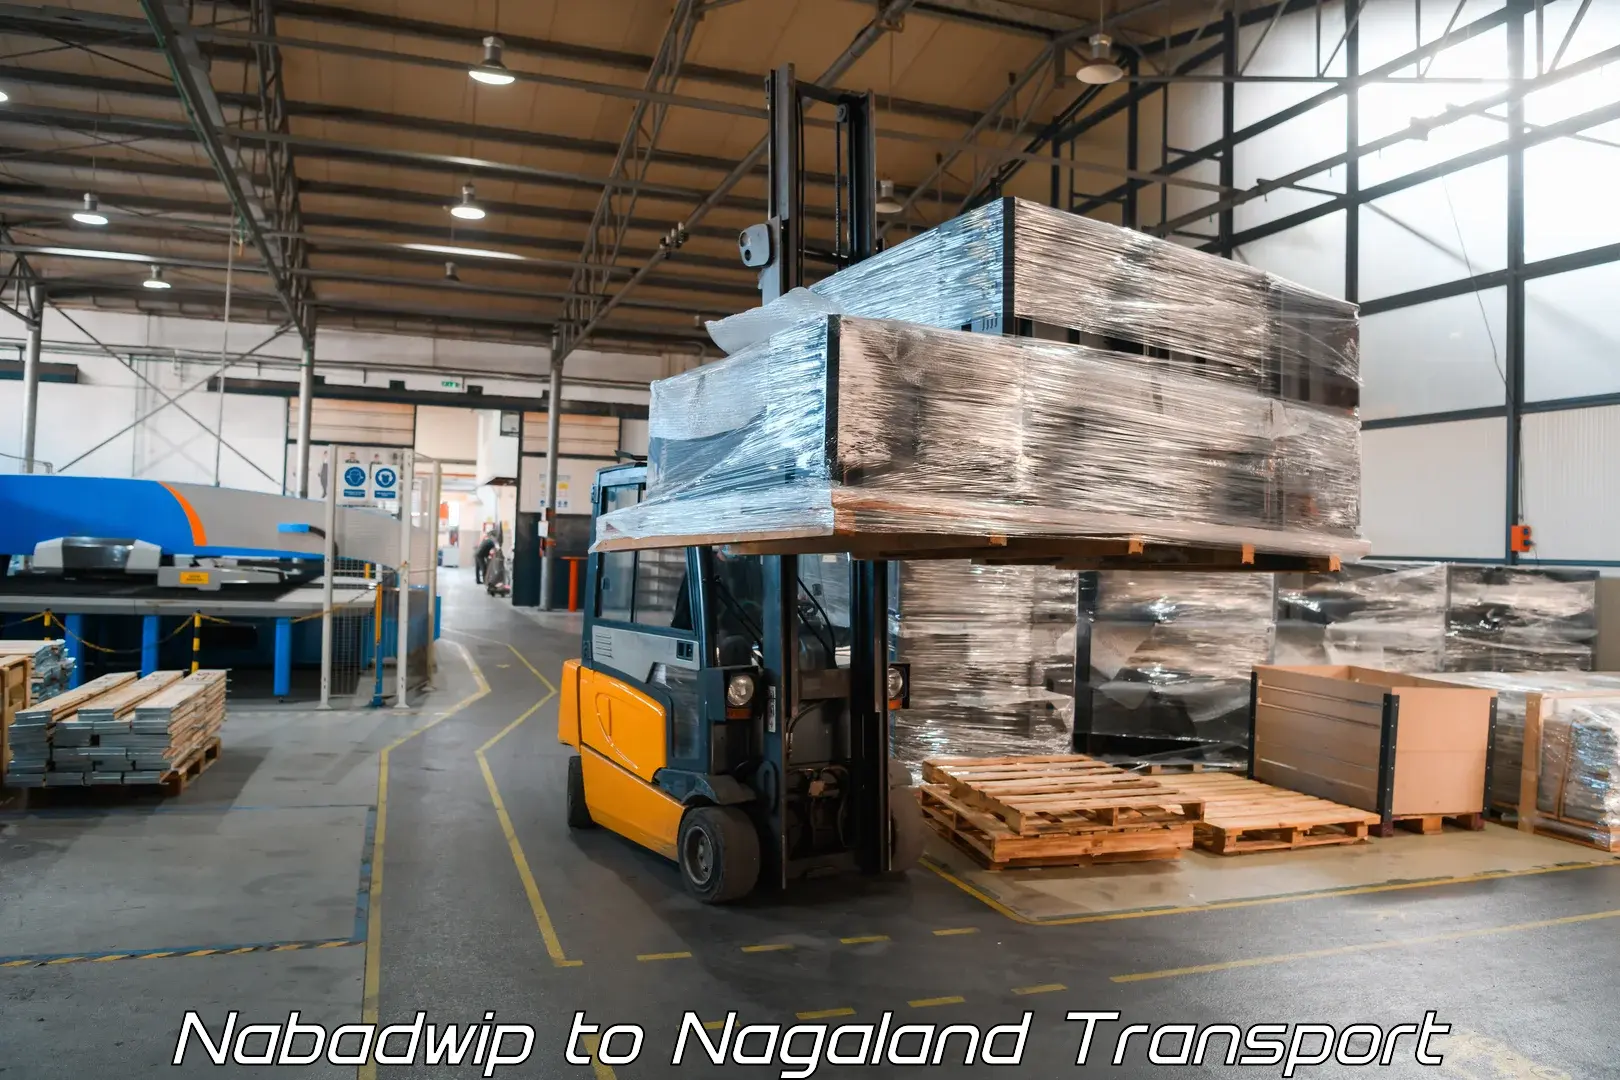 Commercial transport service Nabadwip to Nagaland